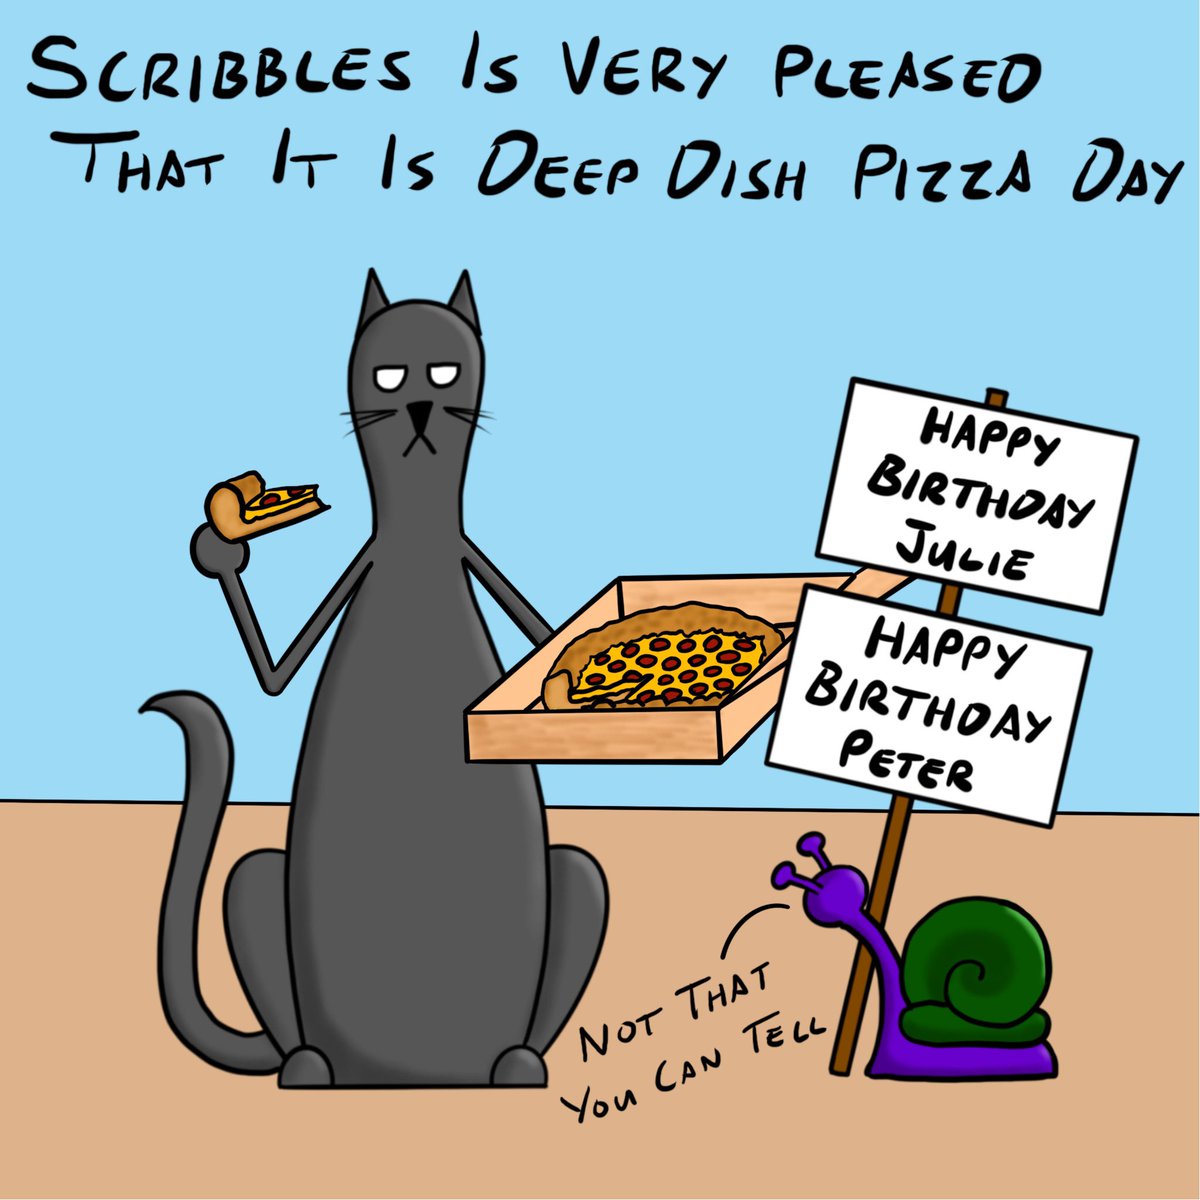 Scribbles is very pleased that it is deep dish pizza day #DeepDishPizzaDay #DeepDishPizza #Pizza #5thApril2023 #CatsOnTwitter #CatsOfTwitter #thisisscribbles